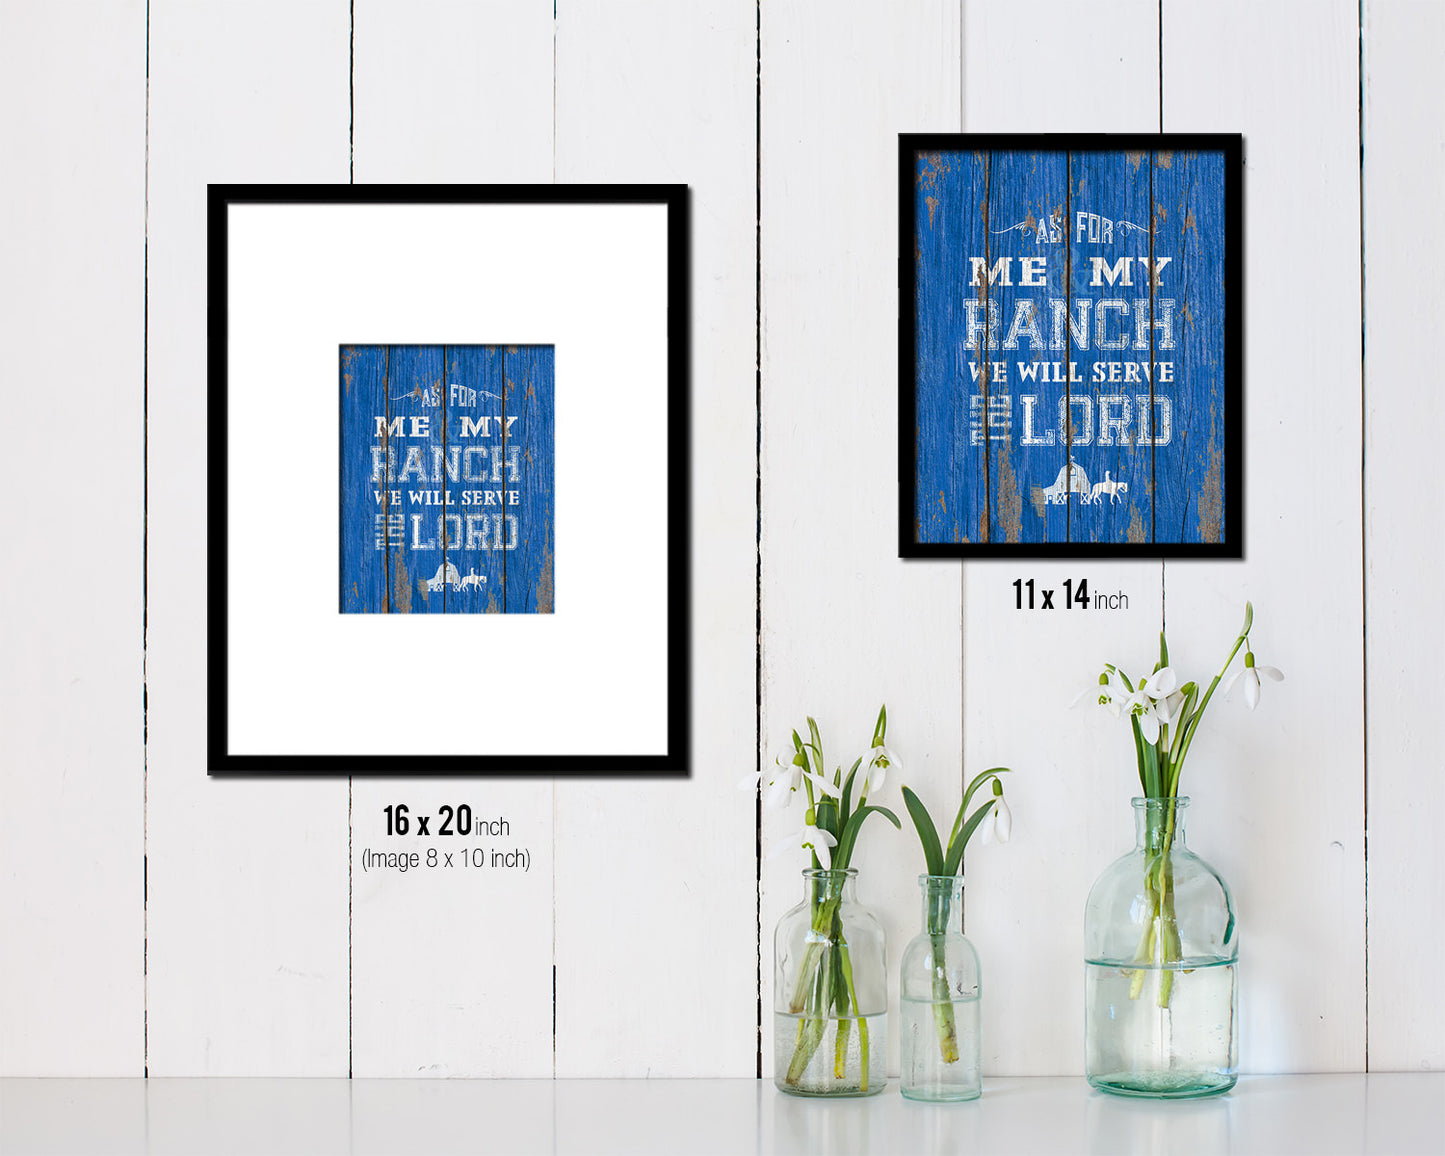 As for me & my ranch, we will serve the Lord Quote Framed Print Home Decor Wall Art Gifts